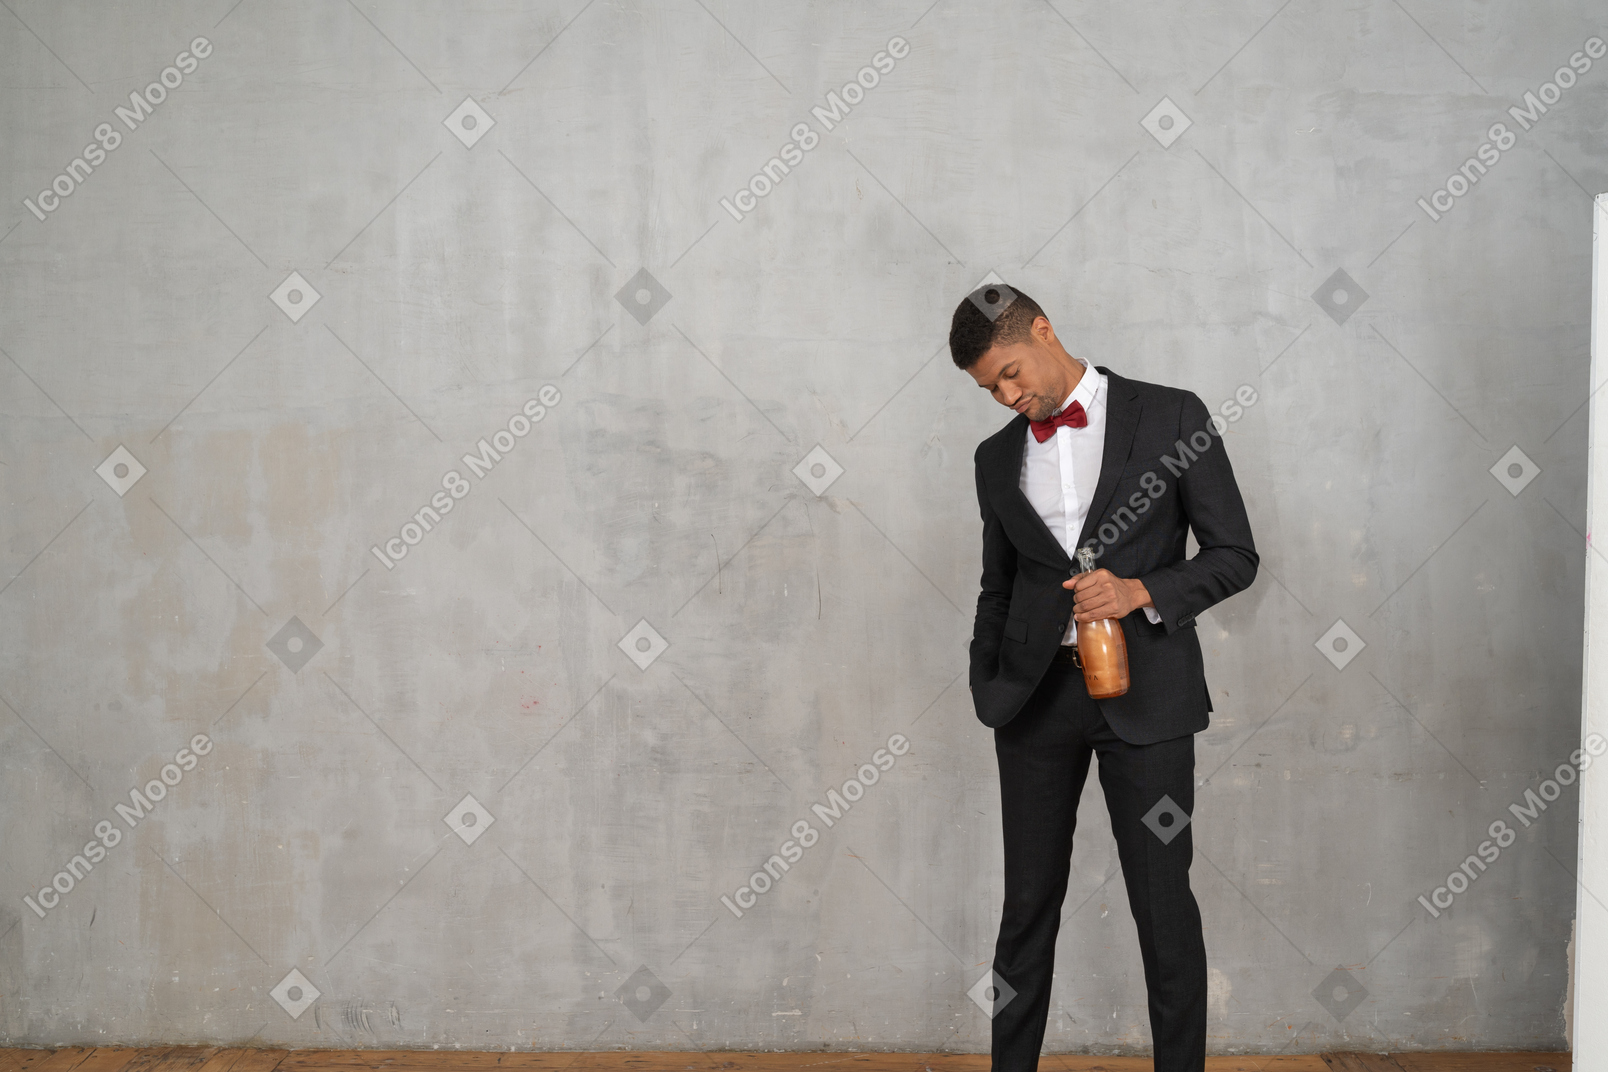 Tipsy man holding a champagne bottle and looking down